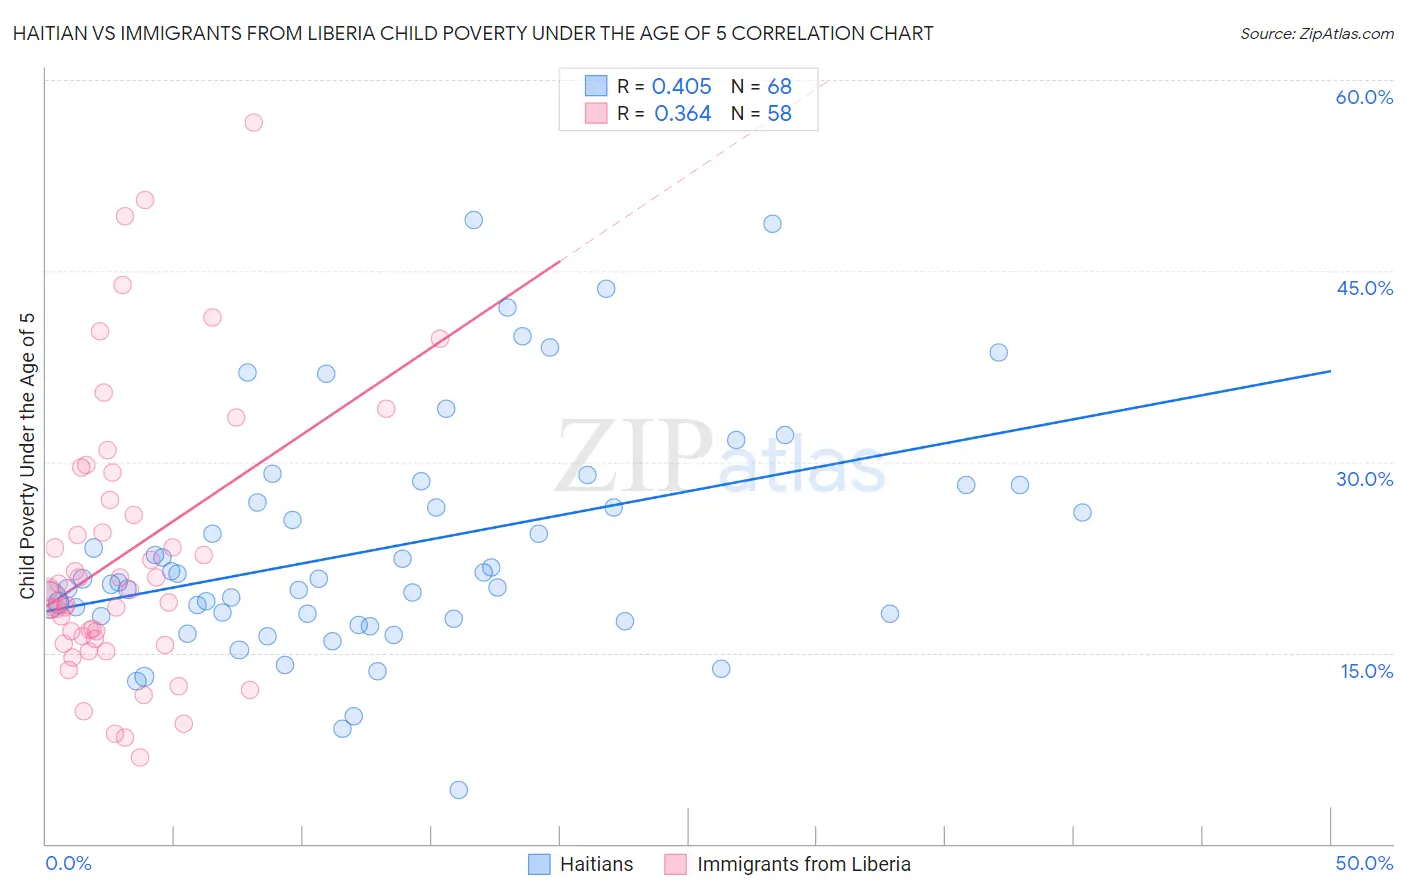 Haitian vs Immigrants from Liberia Child Poverty Under the Age of 5